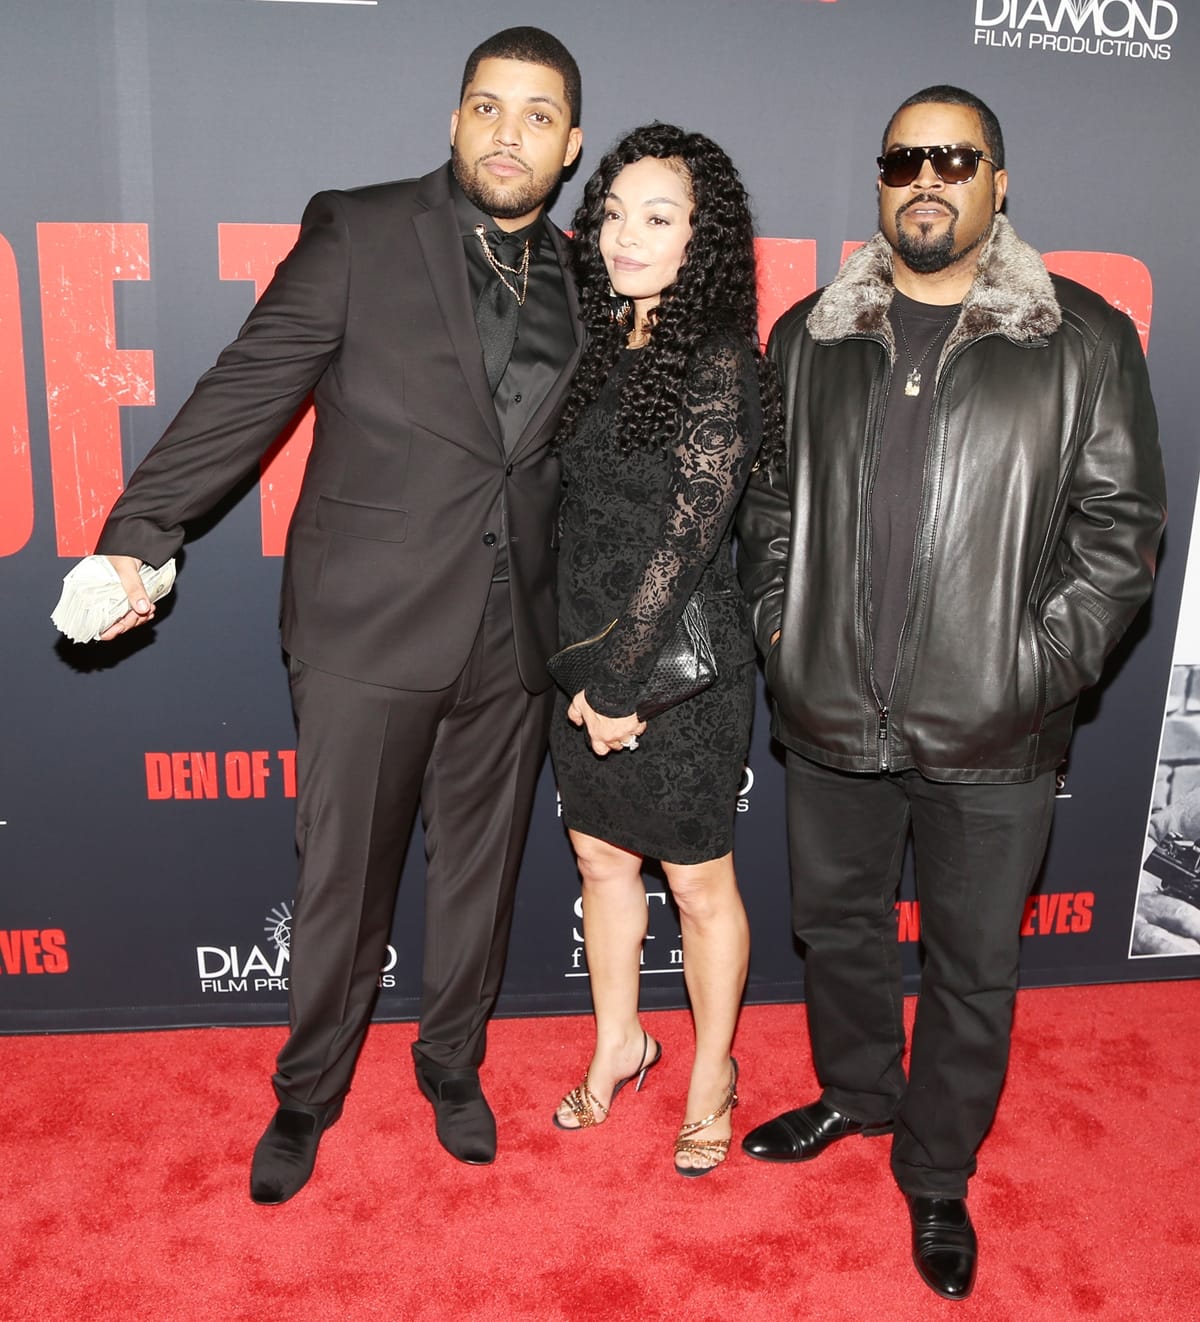 Actor O'Shea Jackson Jr. and his parents Kimberly Woodruff and Ice Cube